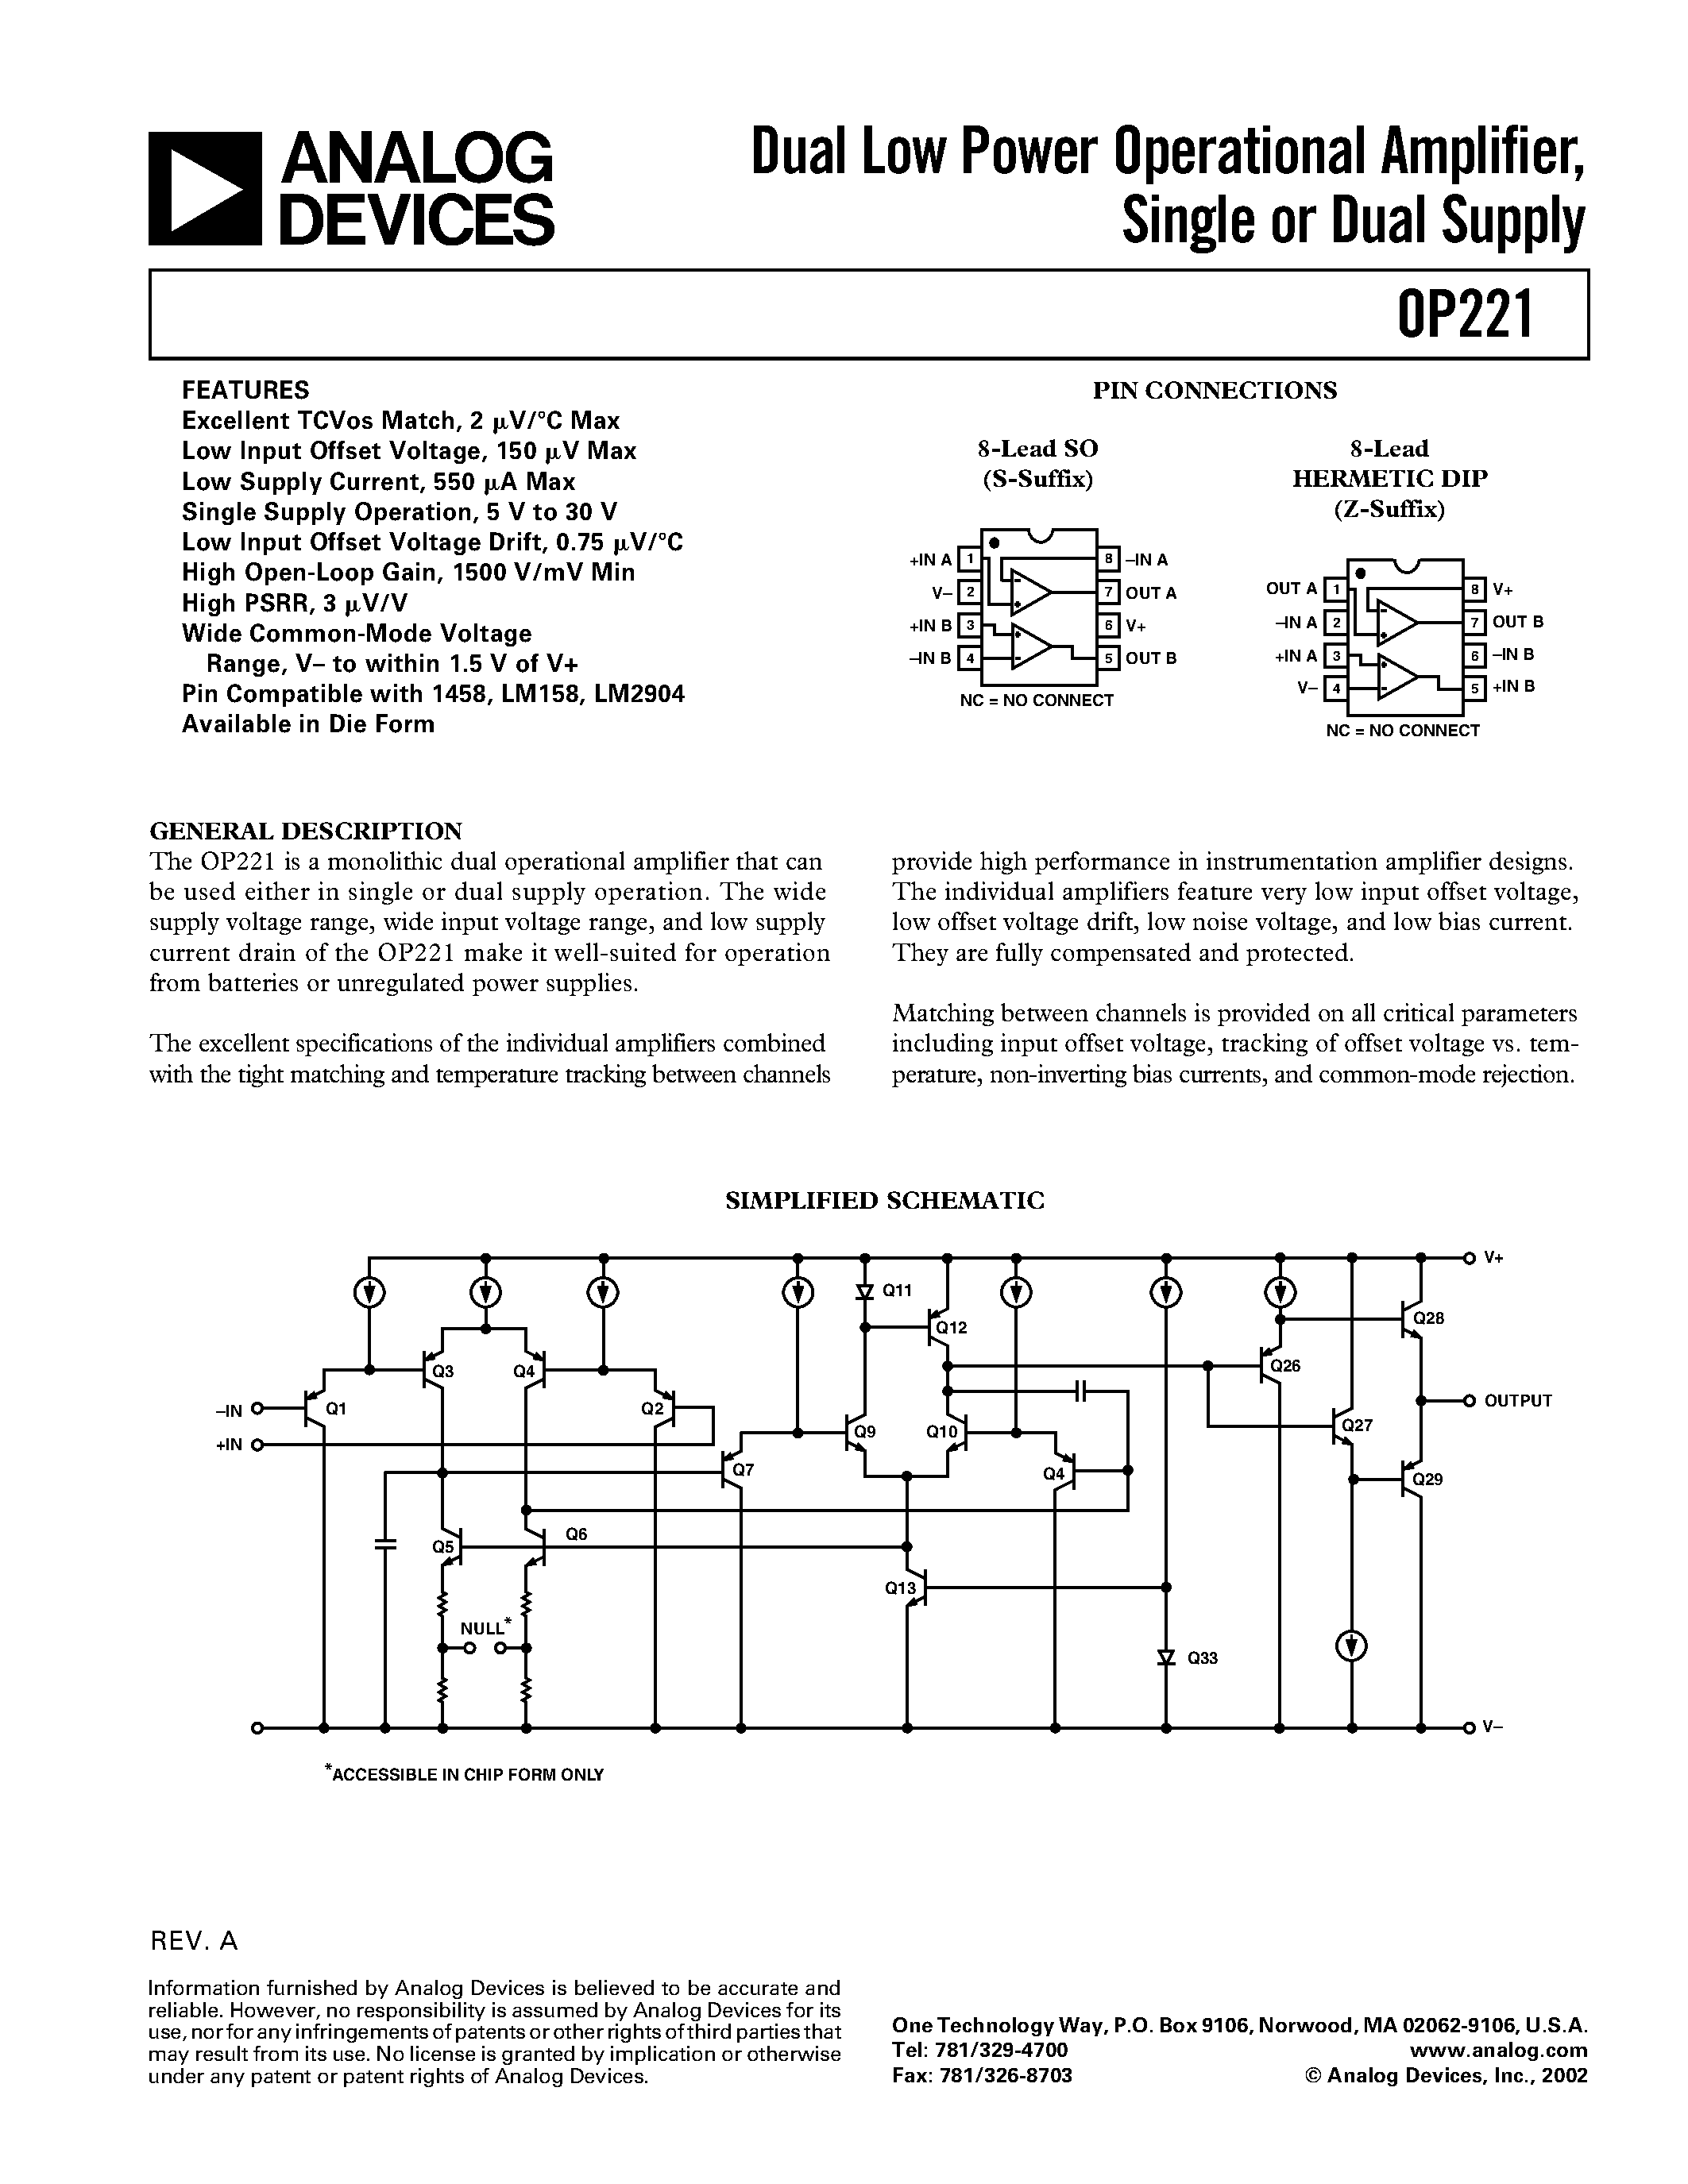 Datasheet OP221 - Dual Low Power Operational Amplifier / Single or Dual Supply page 1